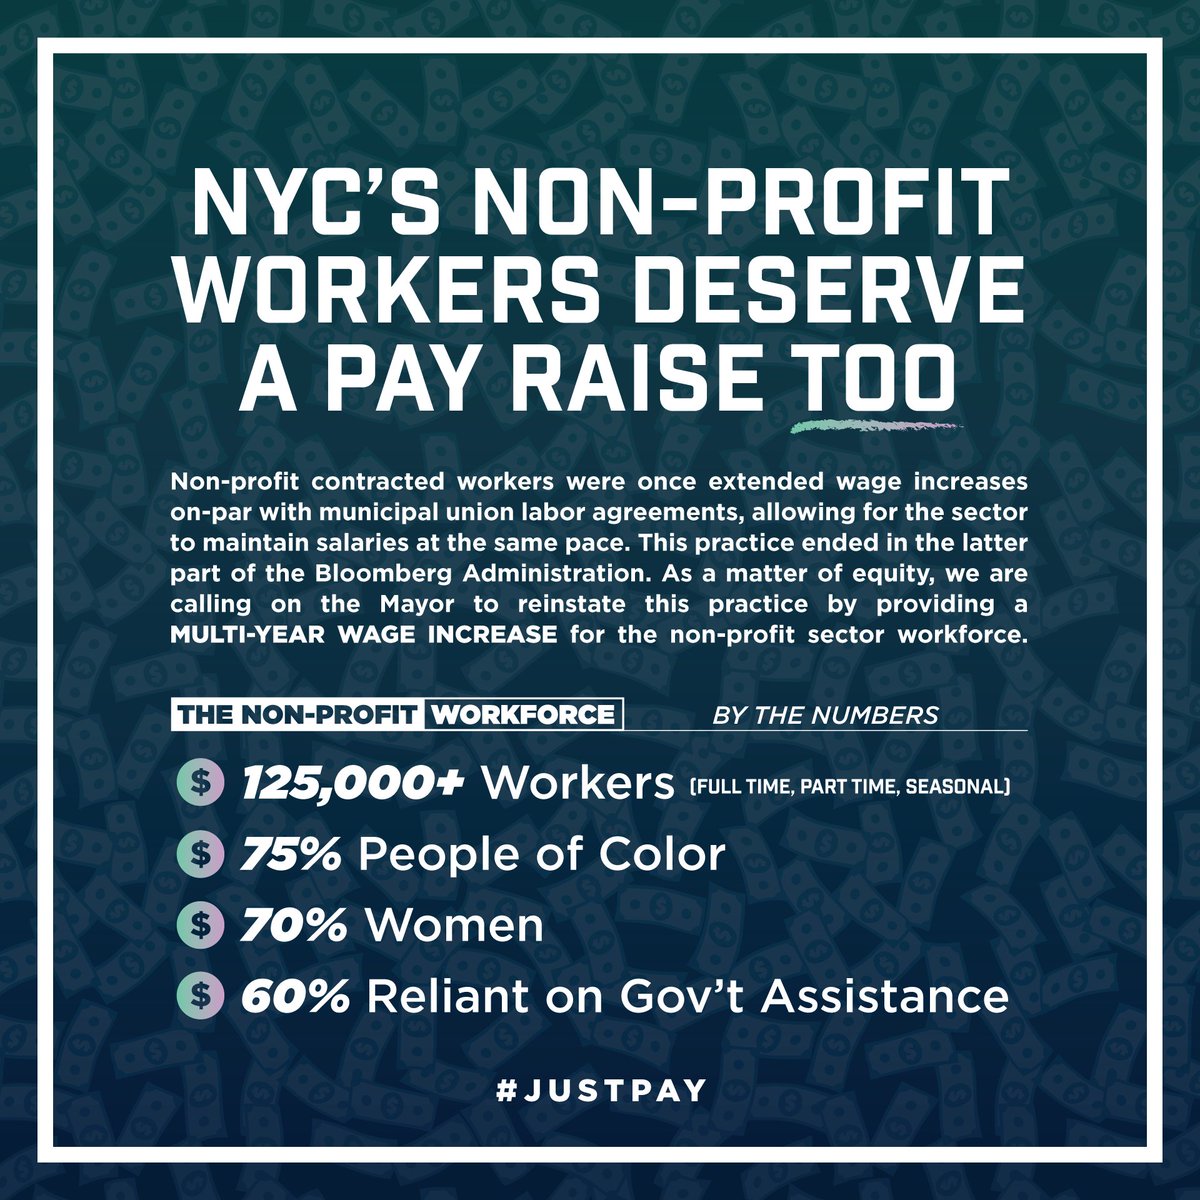 Non-profit contracted workers provide so much for New Yorkers in need, but their wages are woefully out of step with the salaries of other workers in similar jobs.

That’s why we are calling on the City to commit to a multi-year pay increase for these essential workers!

#JustPay